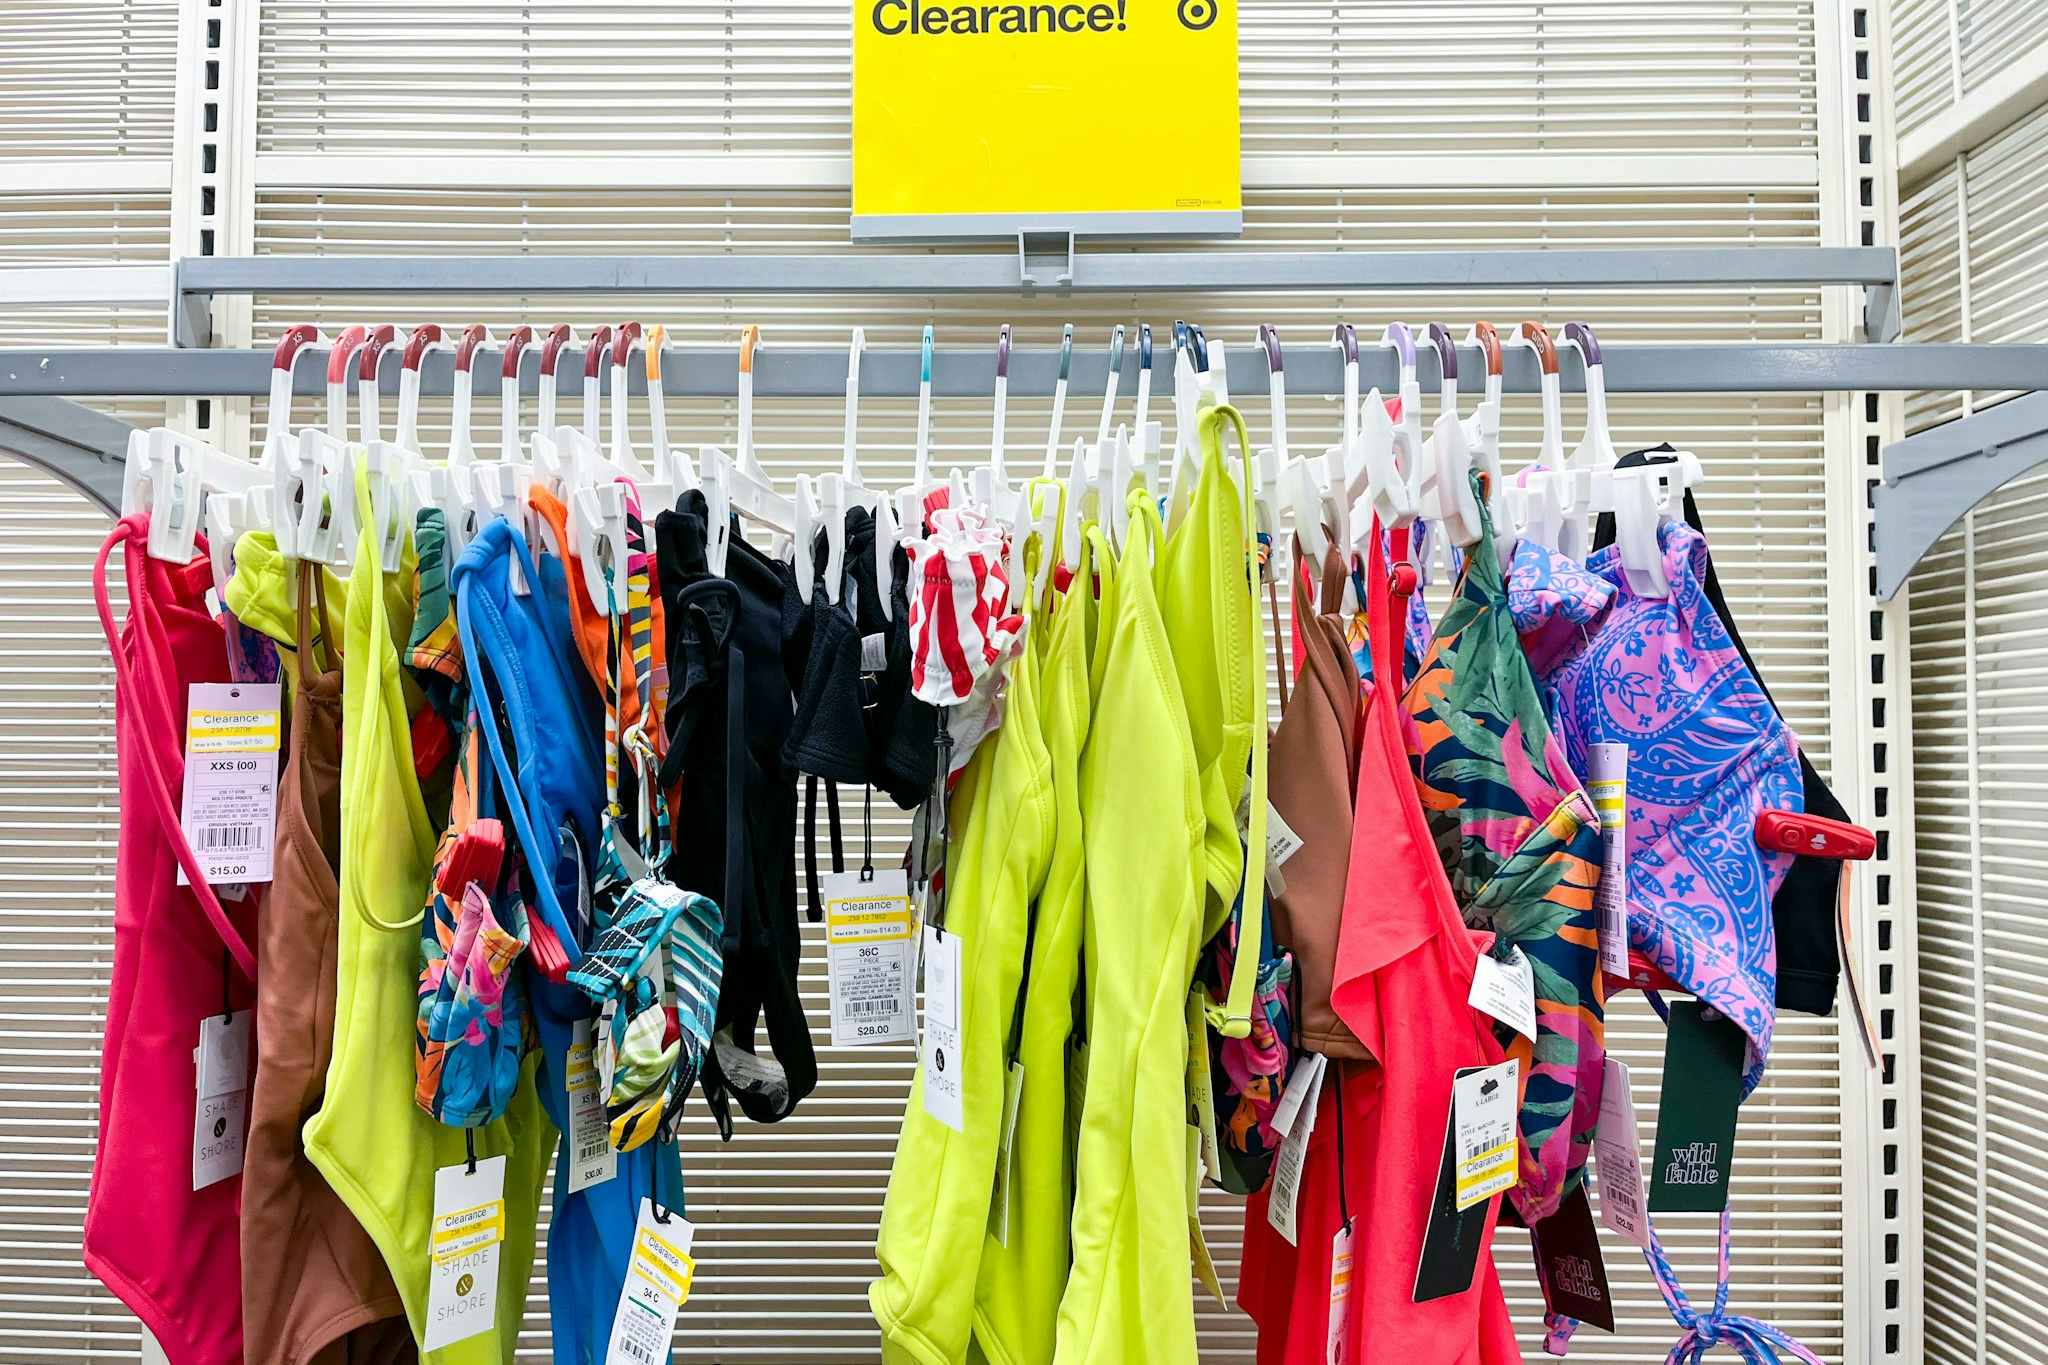 Women's Swimsuit Clearance for Up to 70% Off — As Low as $4.27 at Target